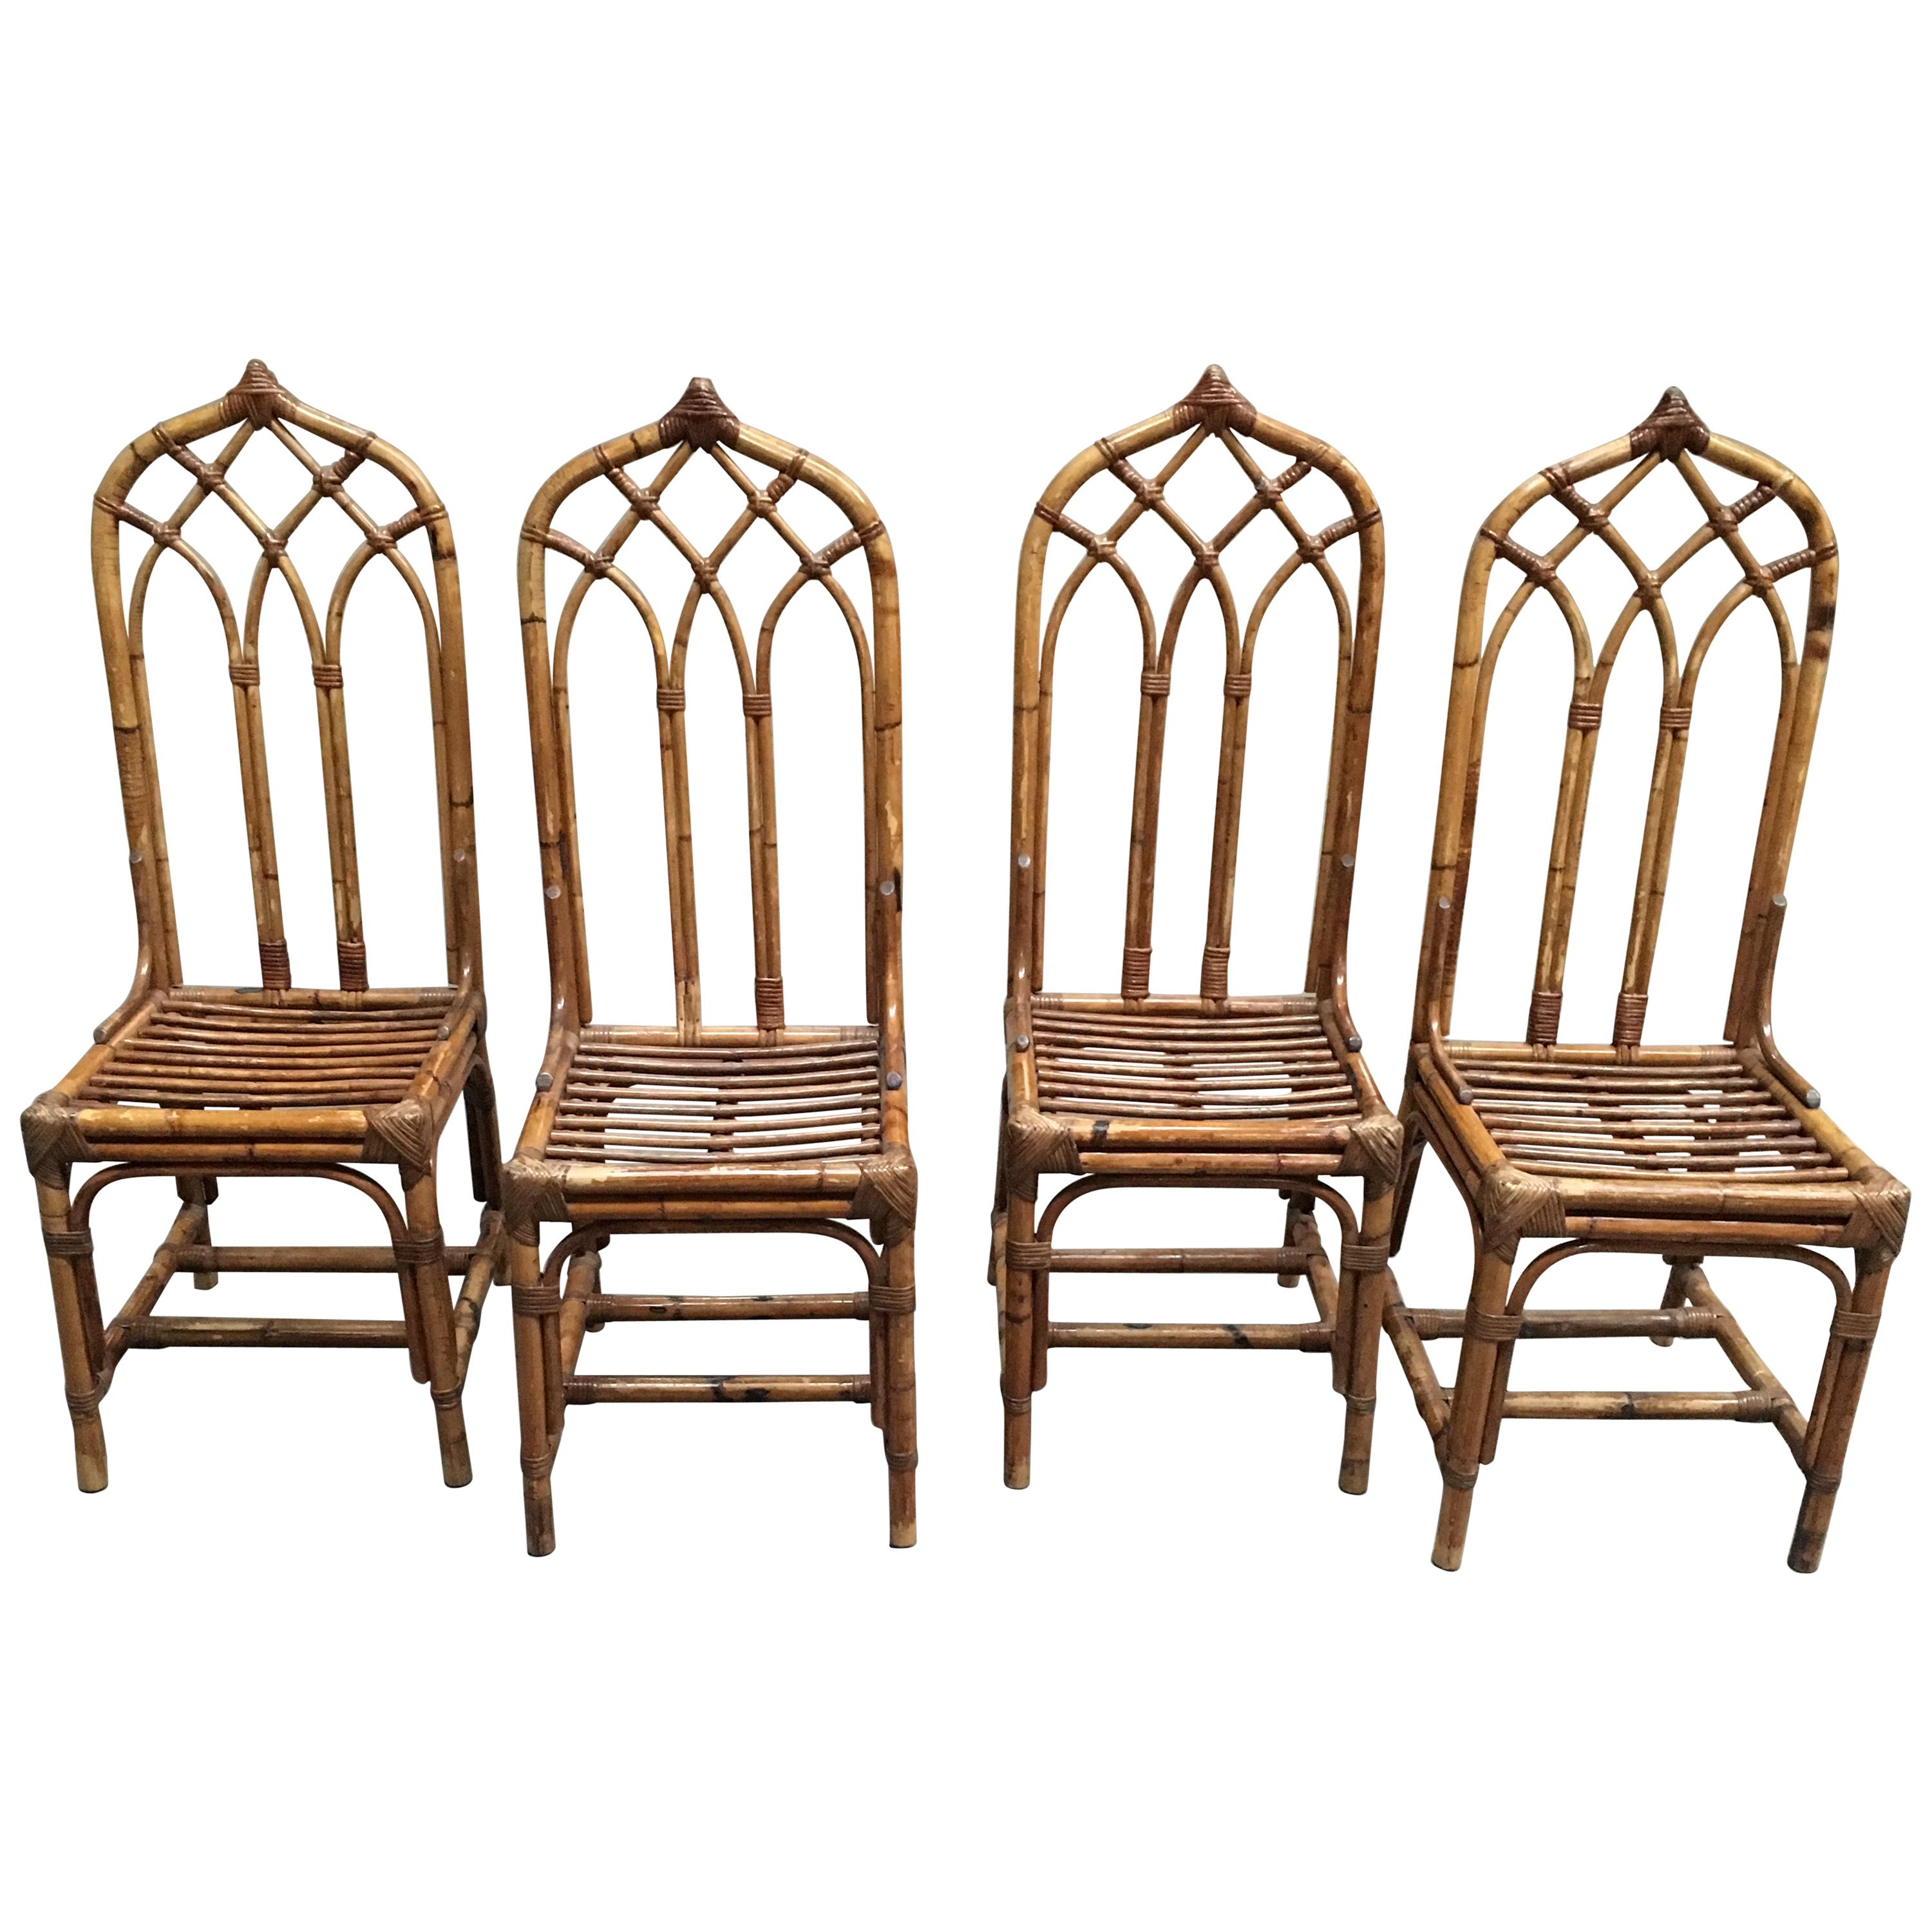 Mid-Century Modern Italian Set of Four Bamboo and Rattan Chairs, 1960s